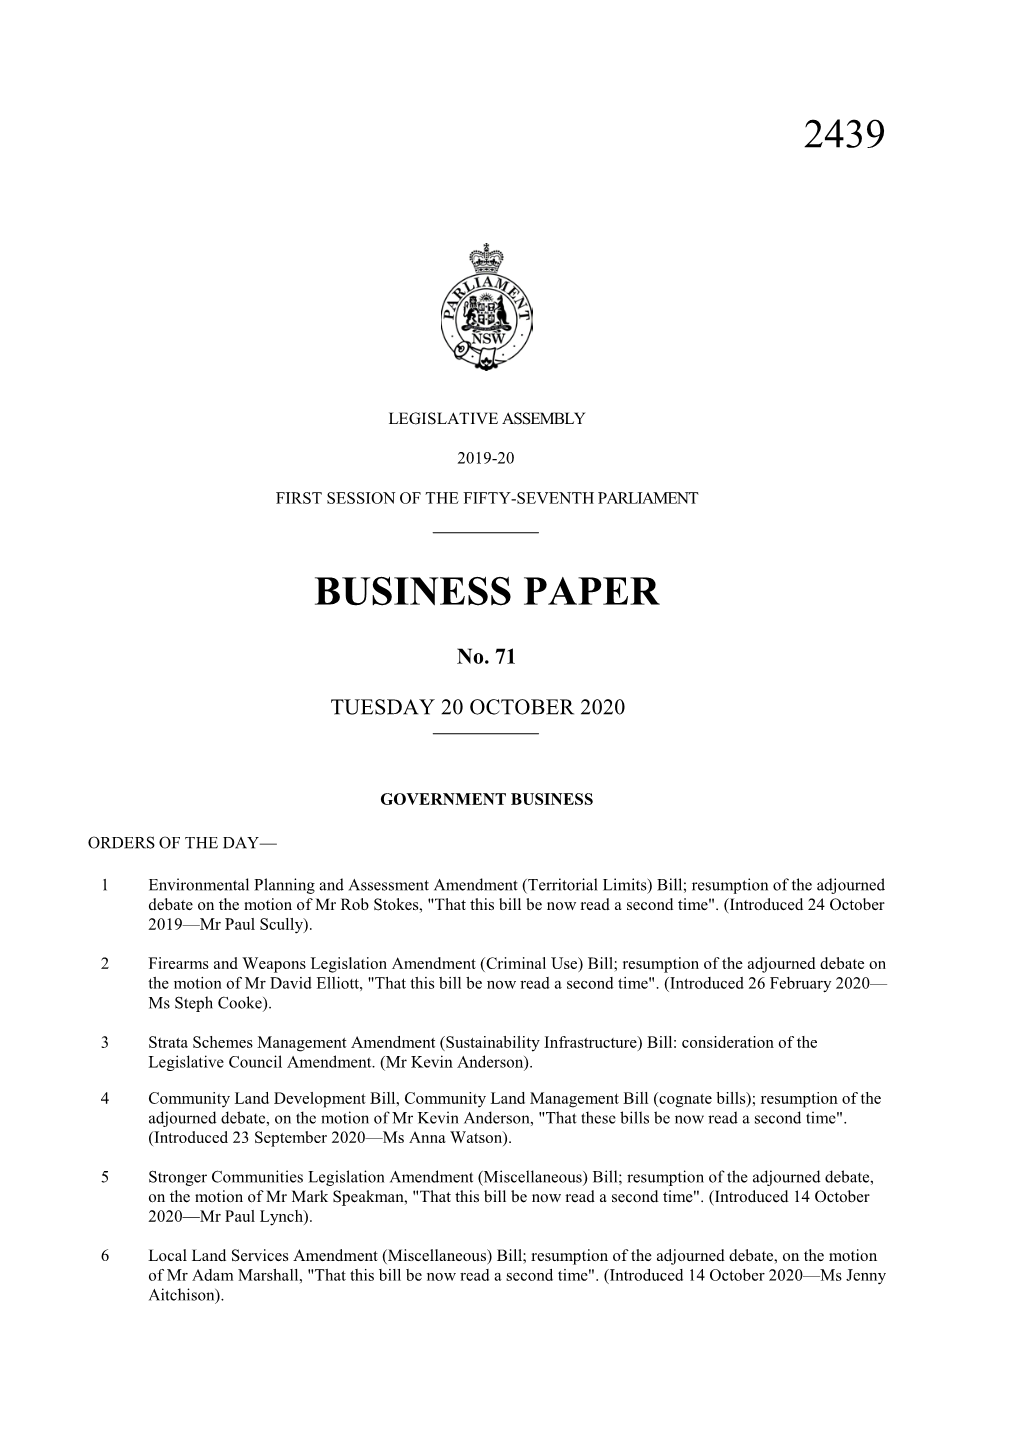 2439 Business Paper